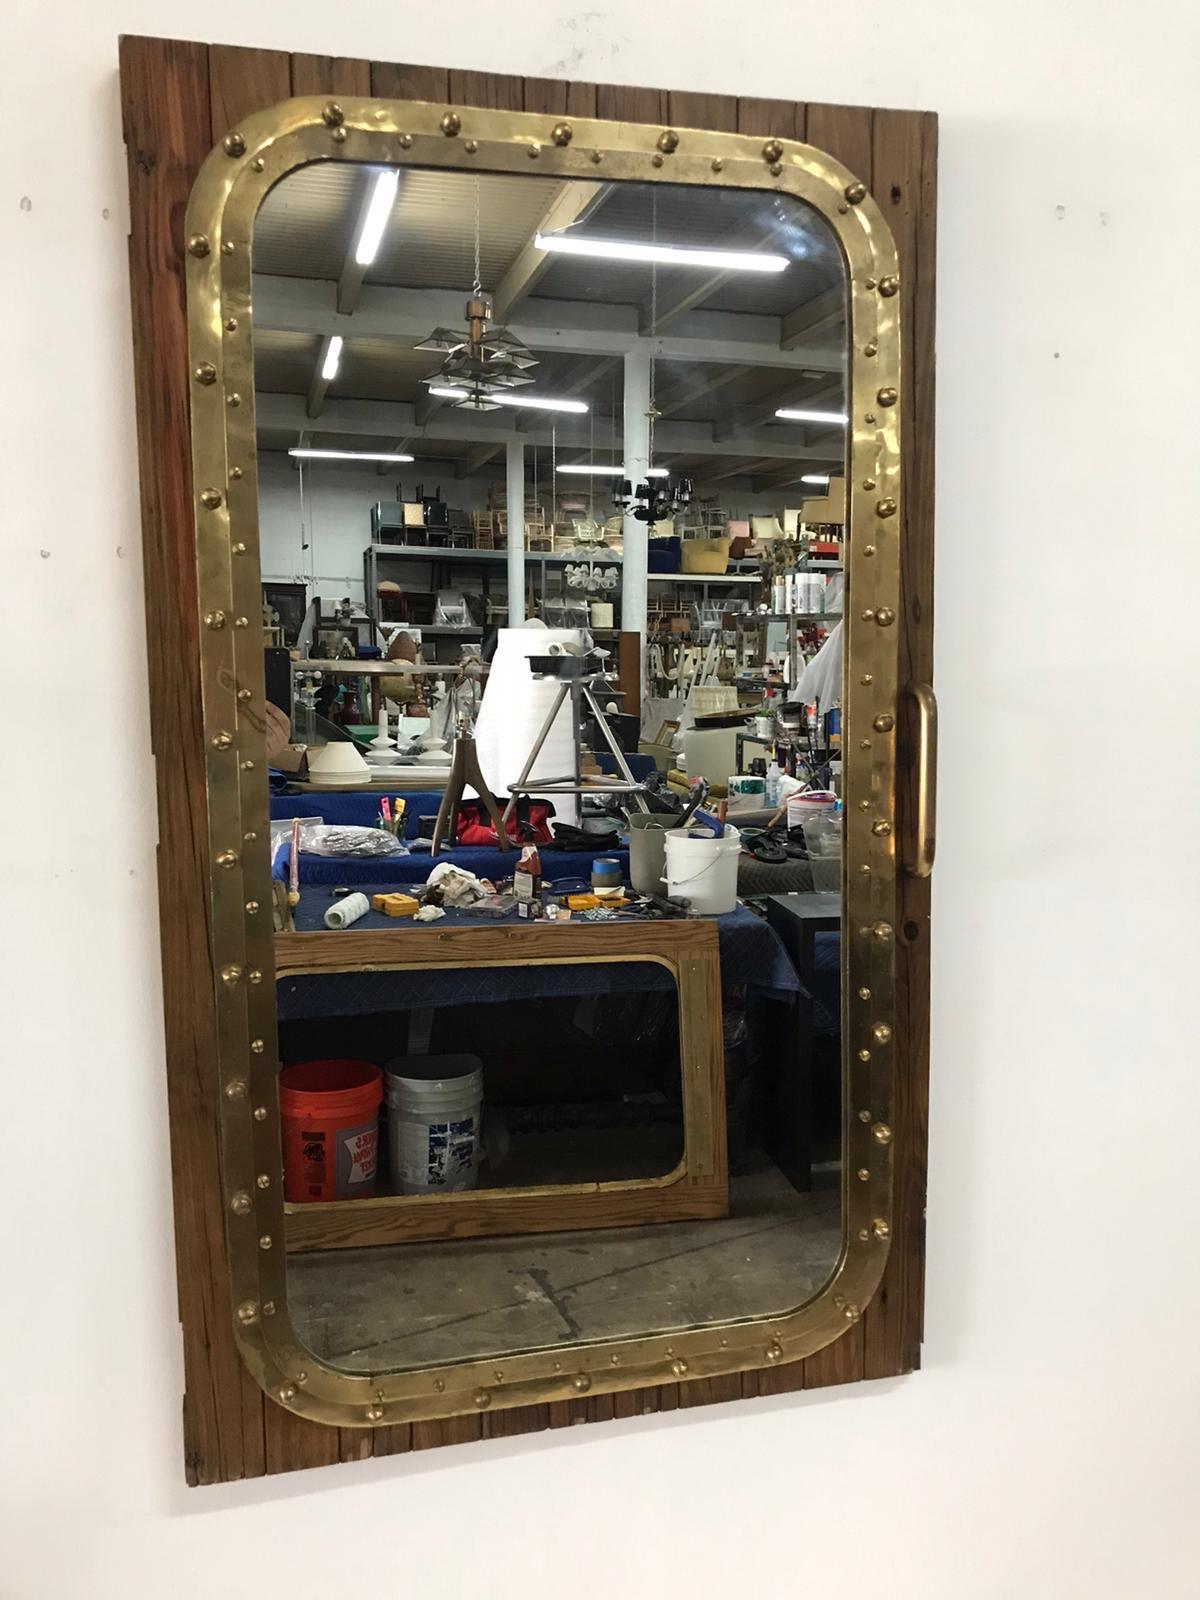 One of two, almost identical windows repurposed into mirrors, this pair of bronze and oak architectural remnants rescued from a shipyard on the Miami River. Antique and very large with original oakwood patina. We removed the hinges but left the